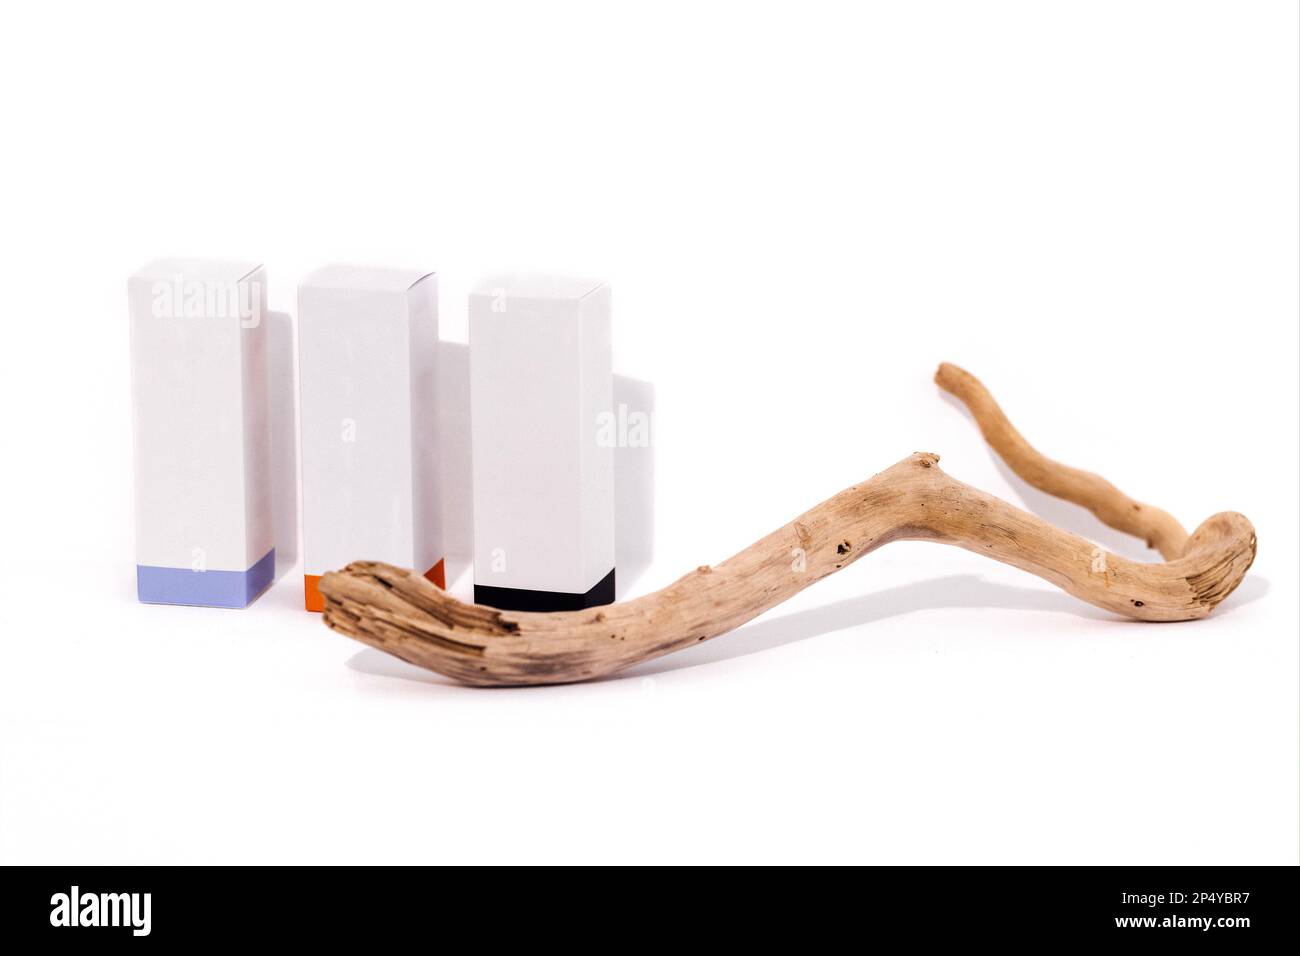 Mockup of three cardboard rectangular boxes for cosmetics. Branch or tree root on the background. White backrop. Free spase for text. Stock Photo